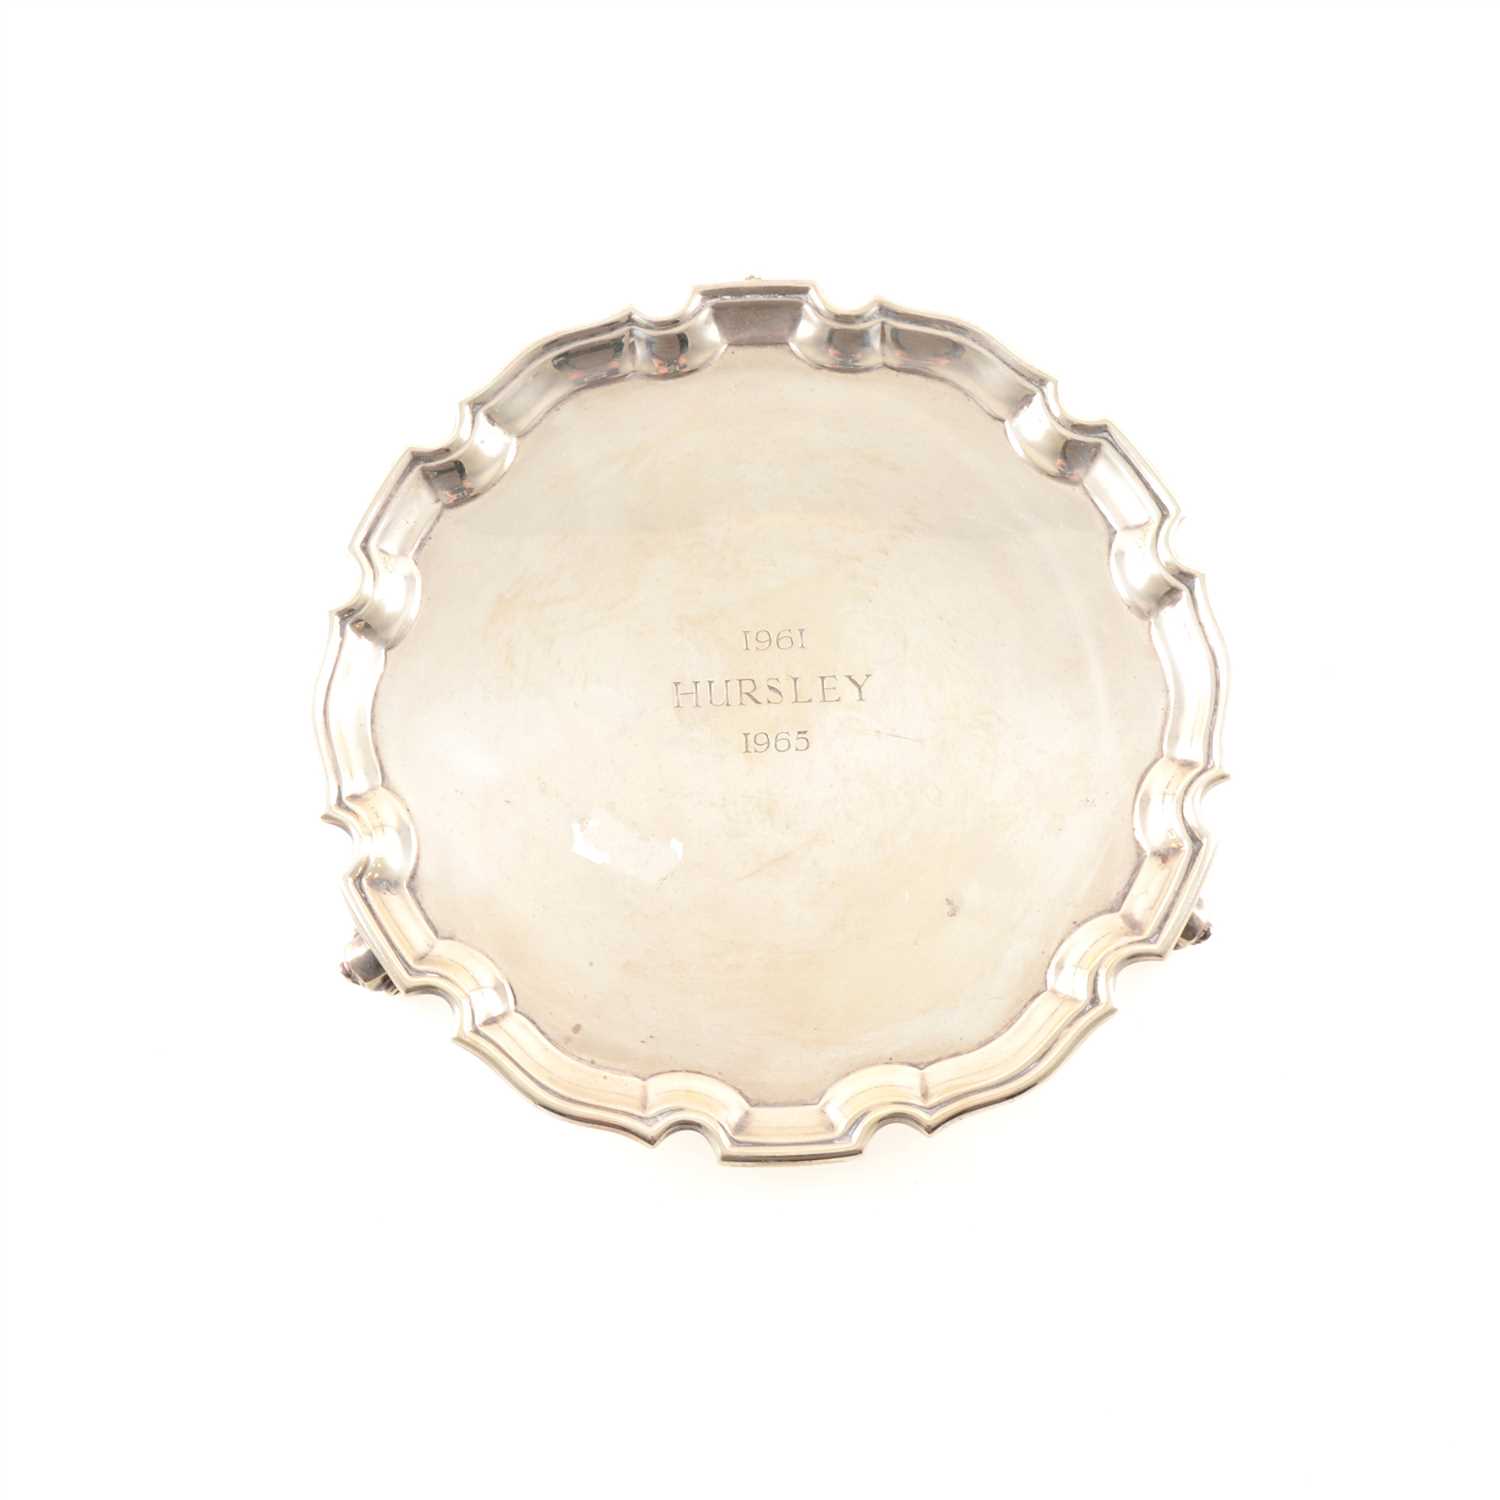 Lot 245 - A small silver waiter by Carrington & Co, with stepped Chippendale border, engraved to centre, London 1962, 20.5cm diameter, weight approx. 12.9oz.